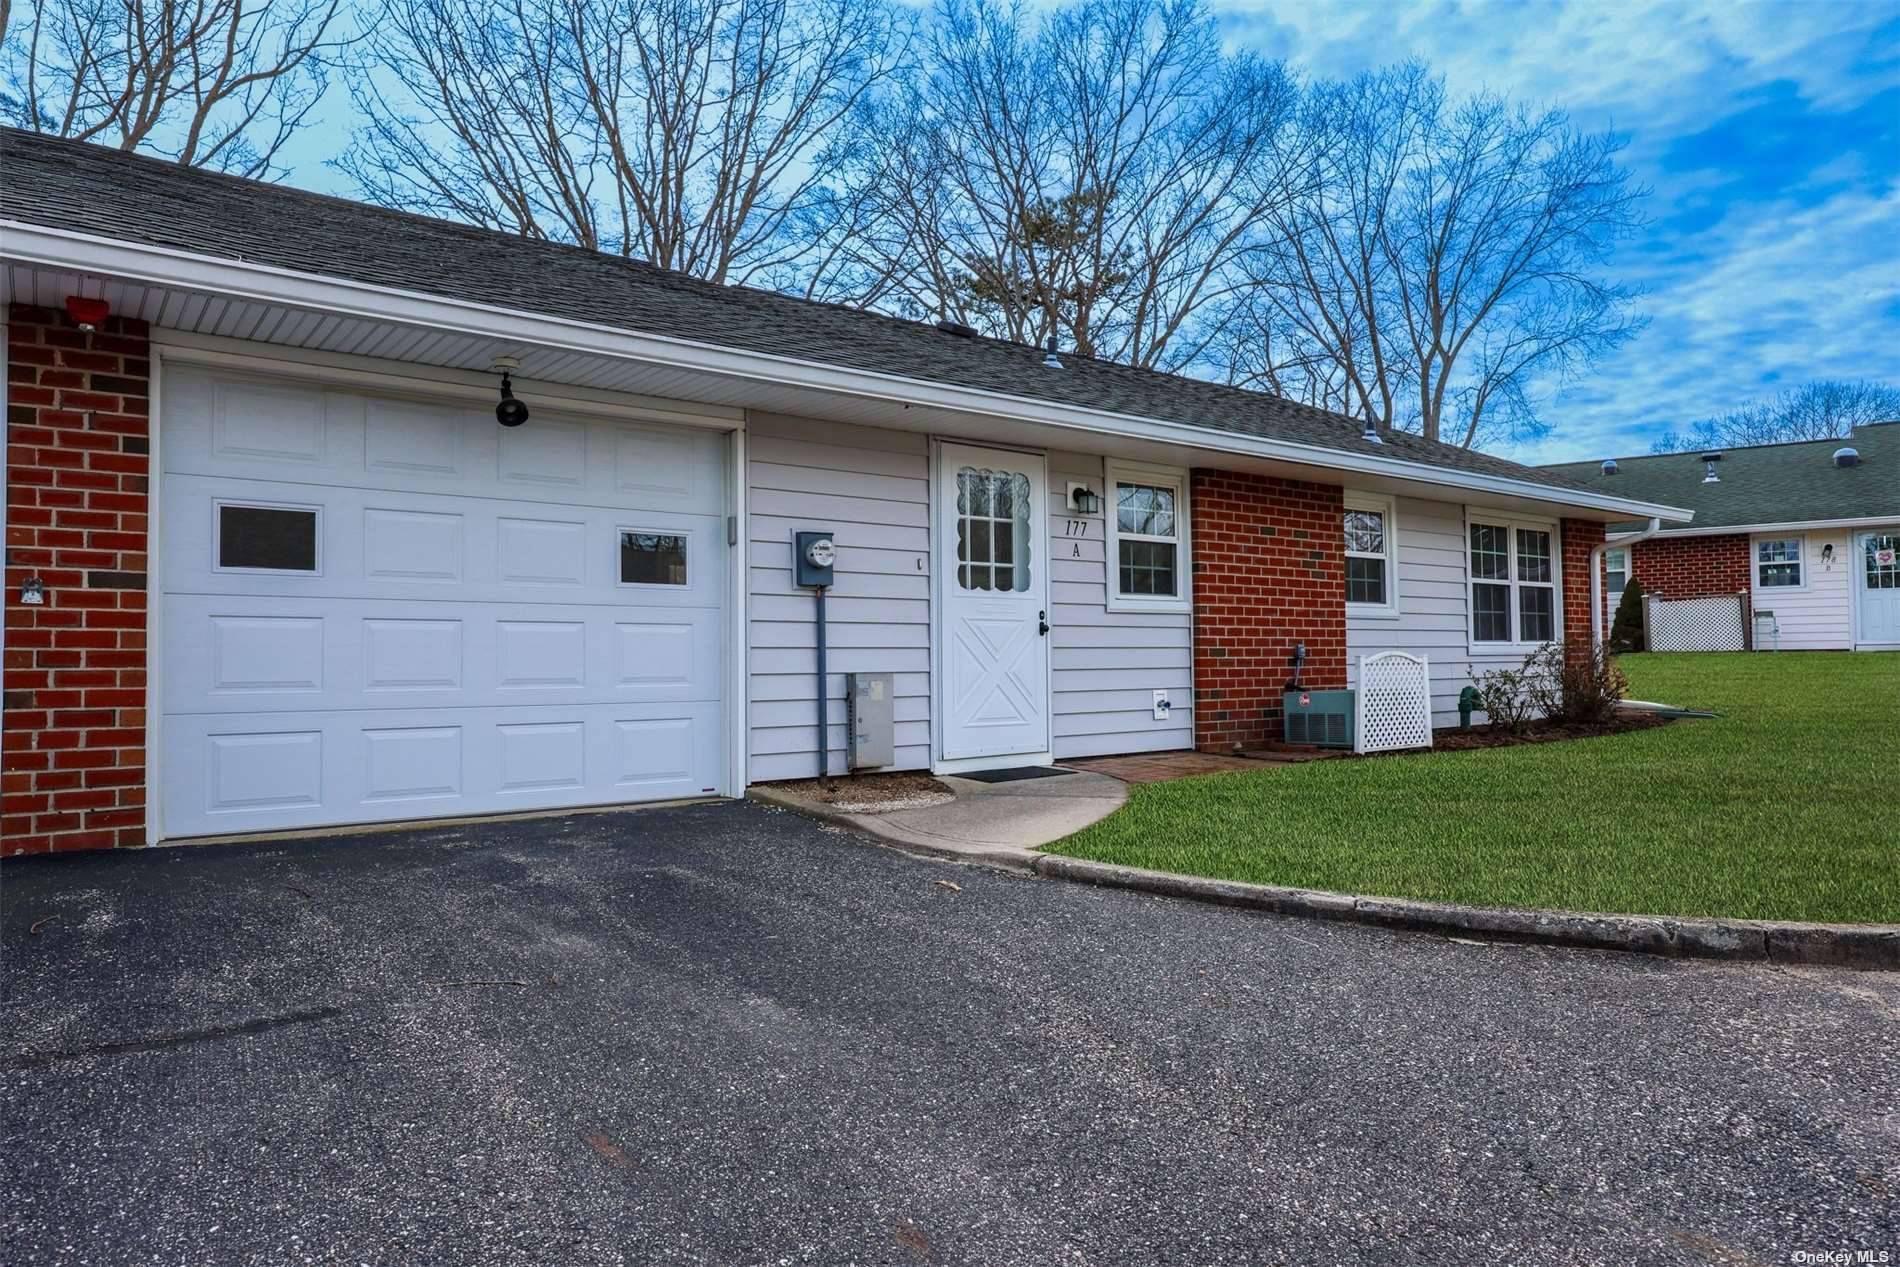 Prepare to be blown away by this completely renovated 2 Bedroom, 1 Full Bath Baronet model.